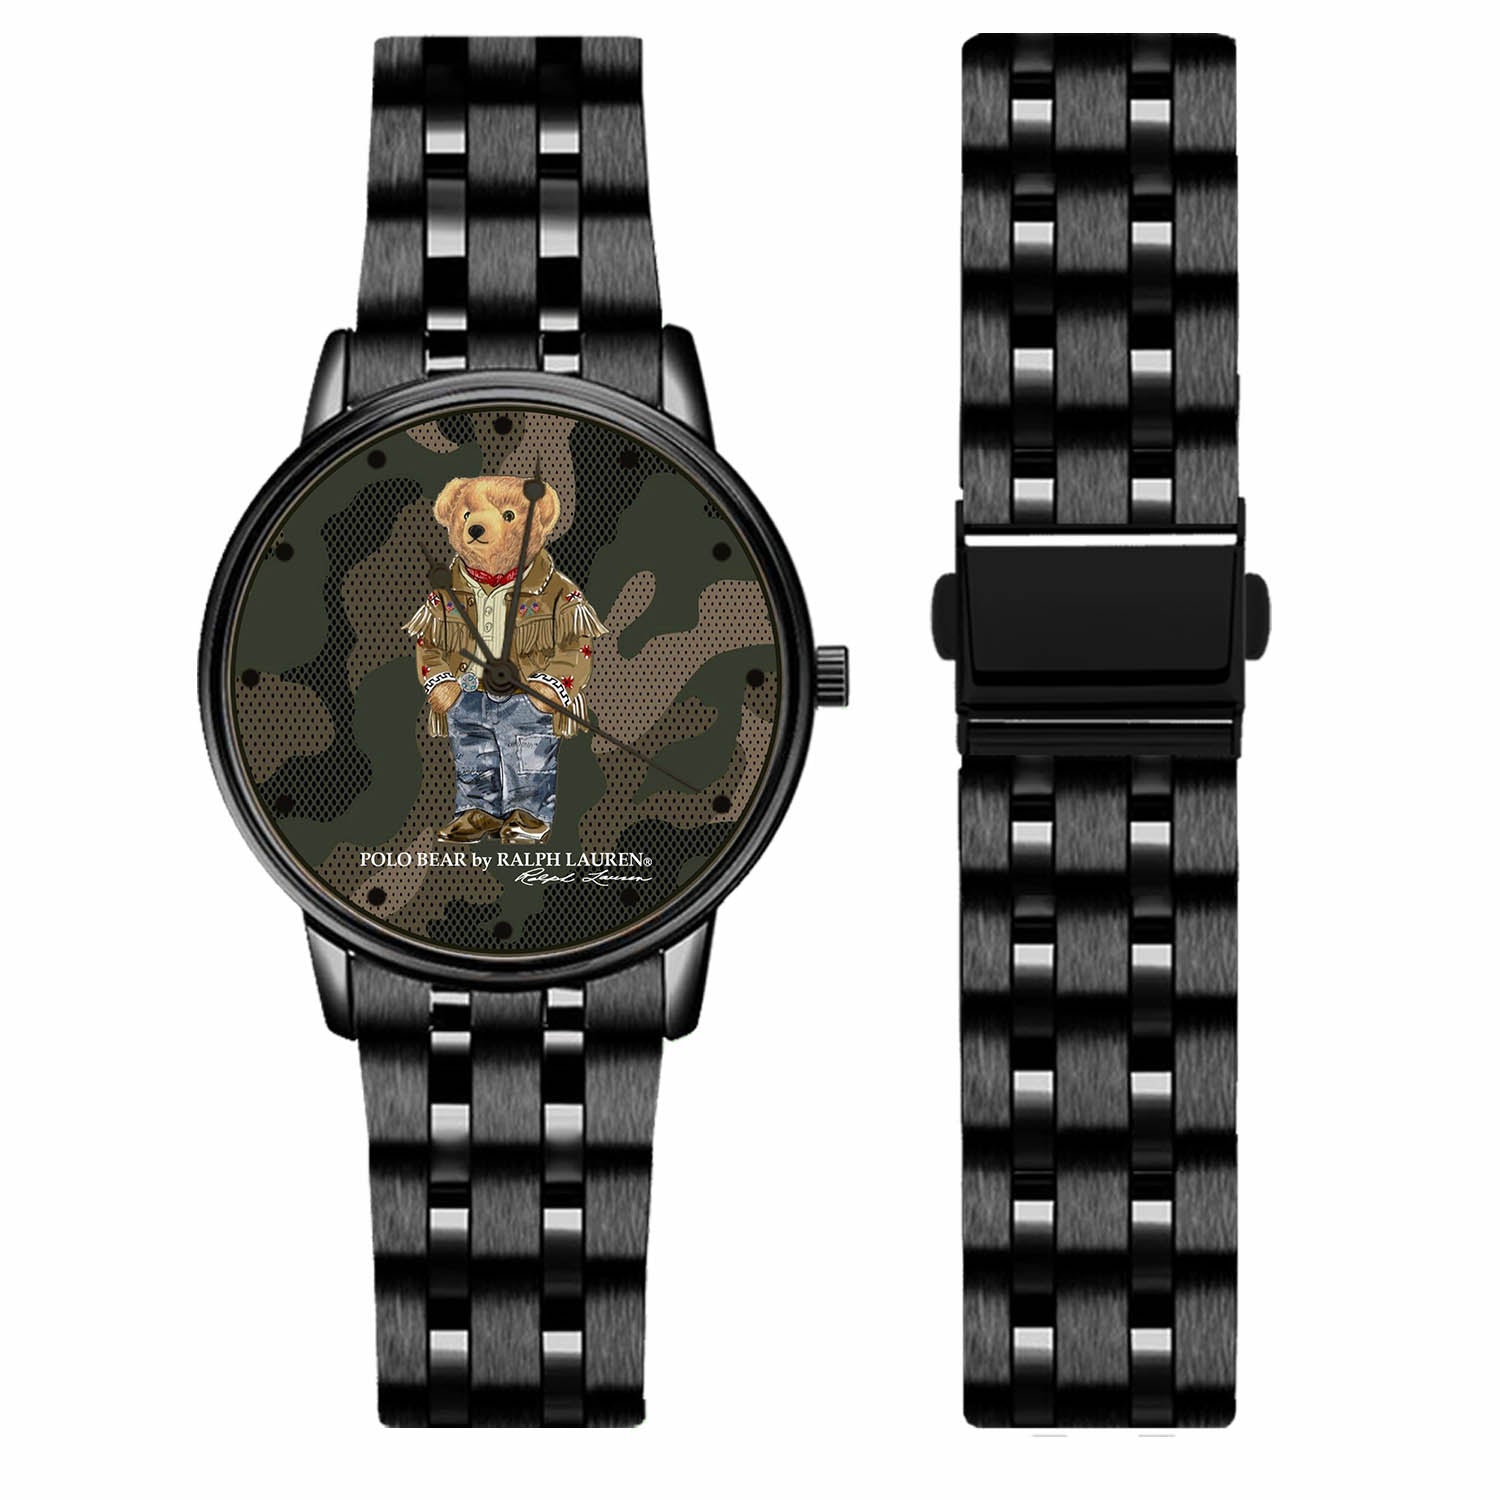 POLO Bear Military By Ralph Lauren Watches KP4PL